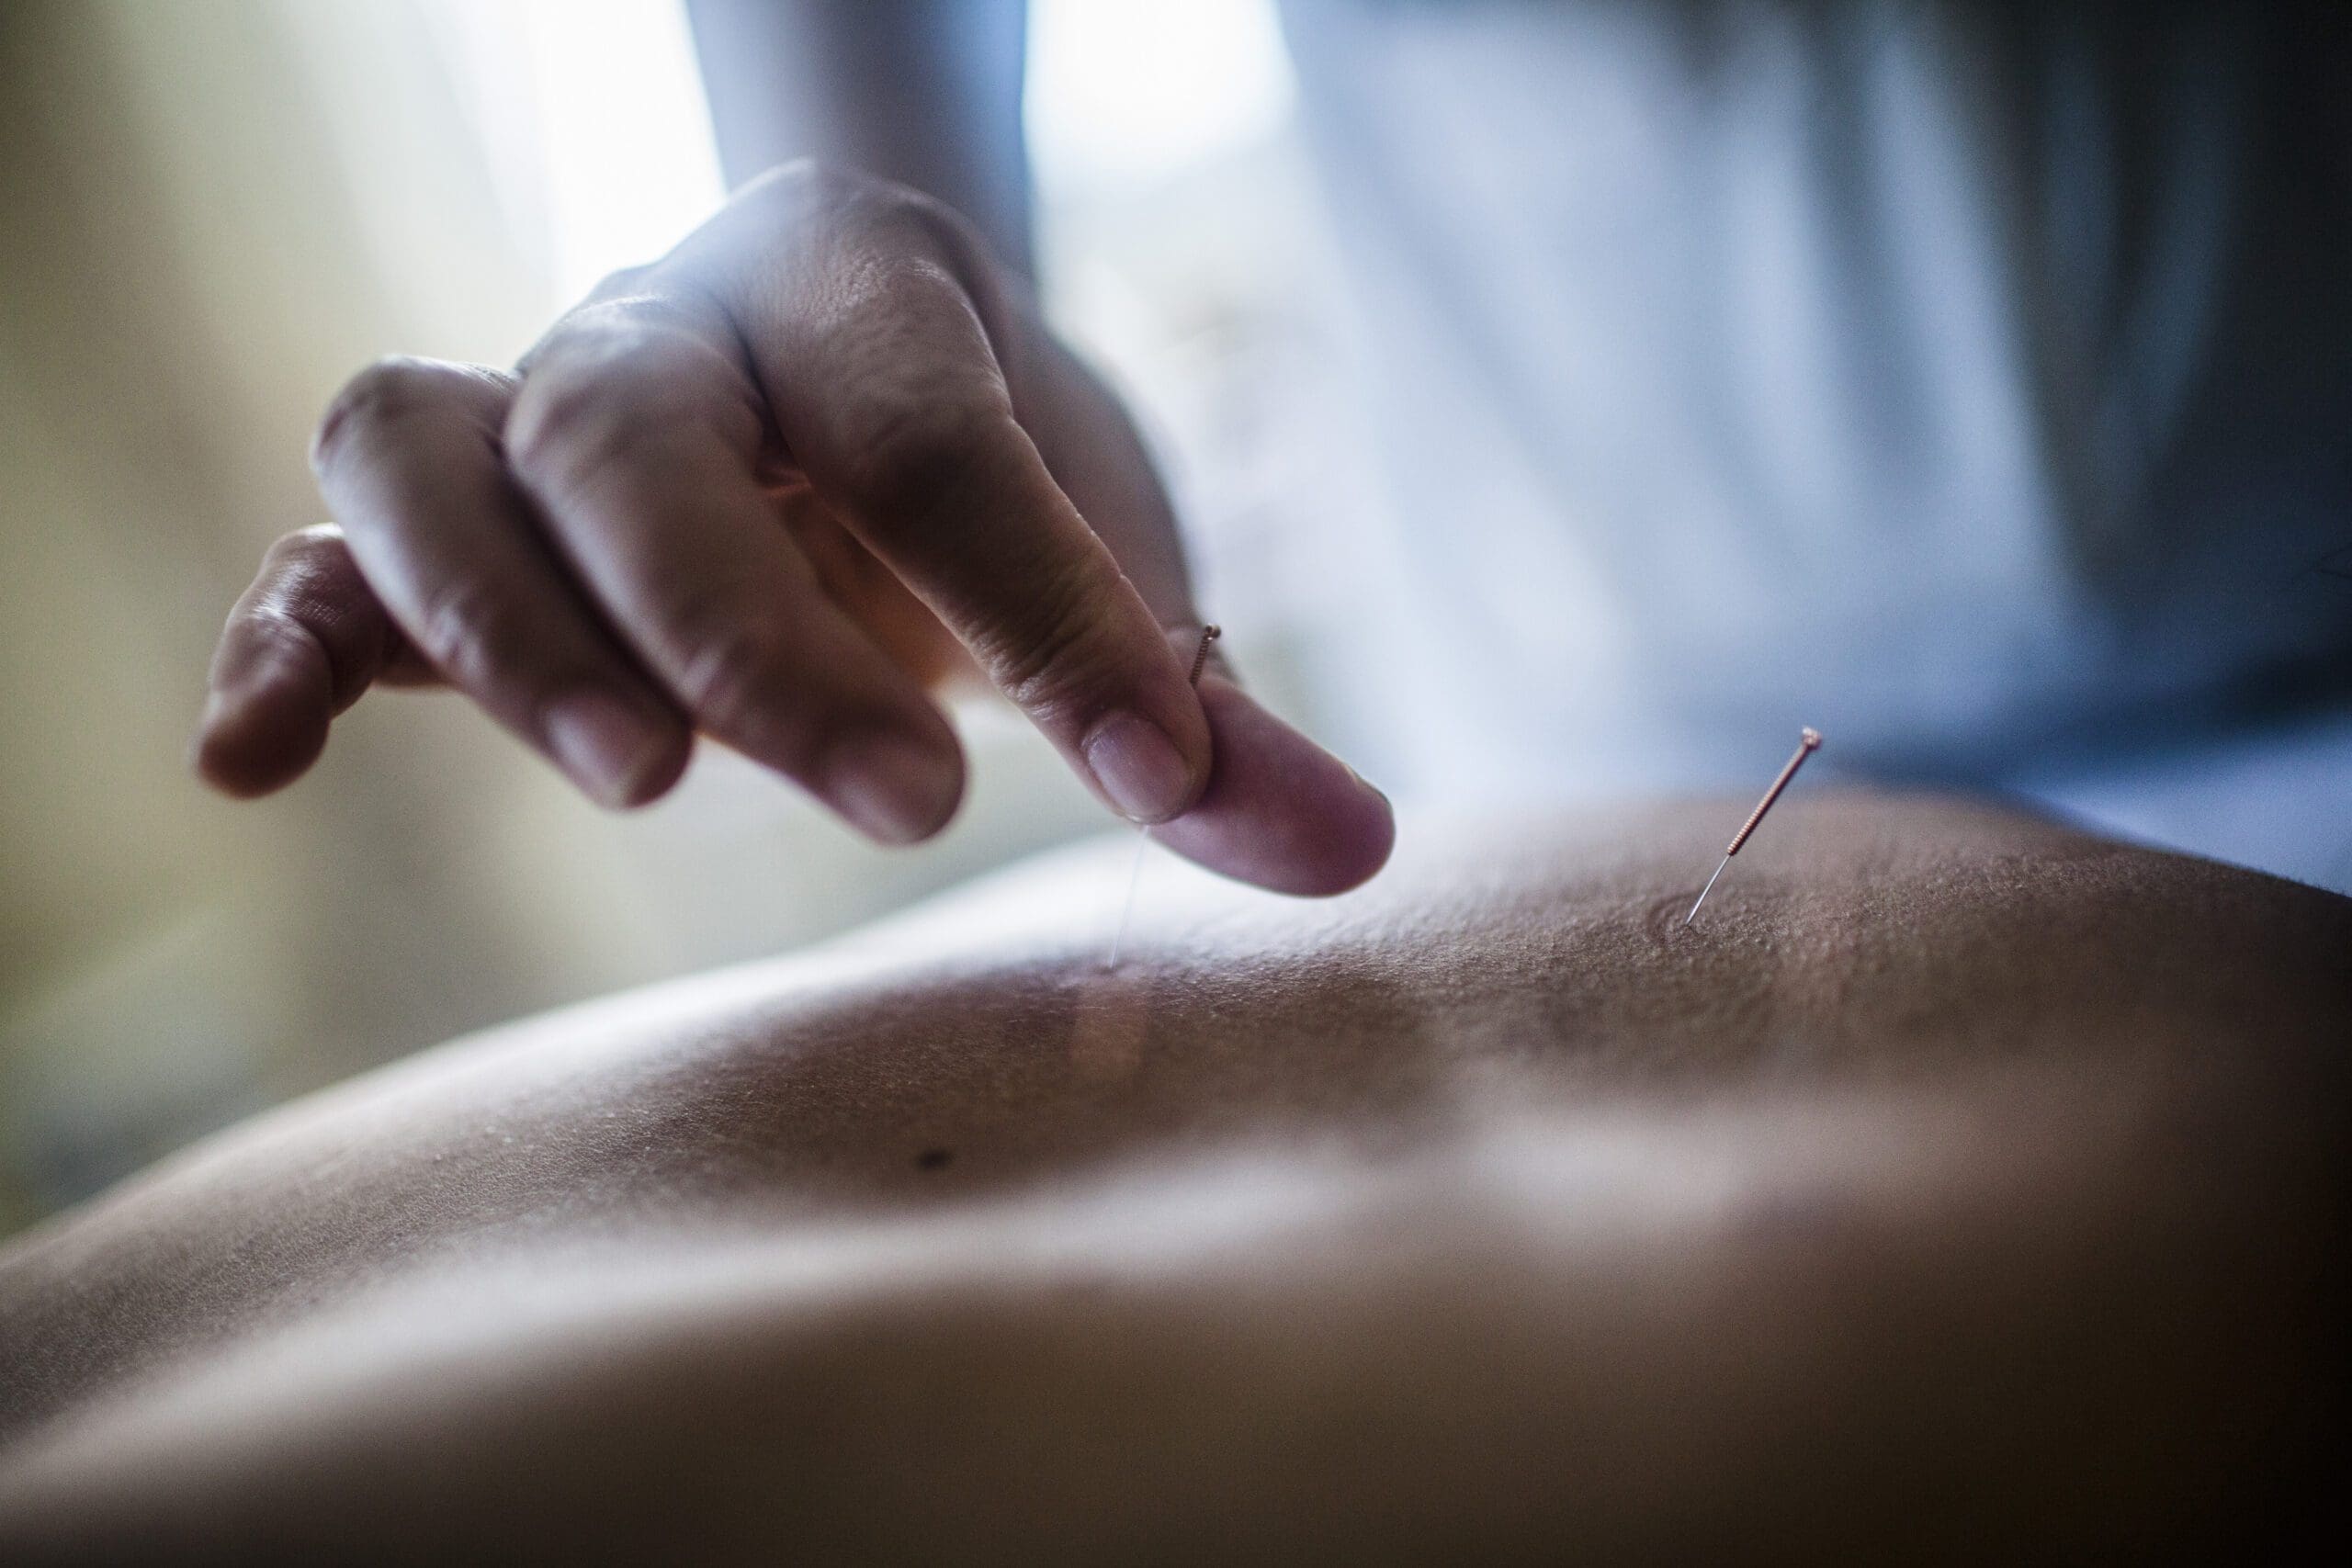 Performing acupuncture on a patient's back